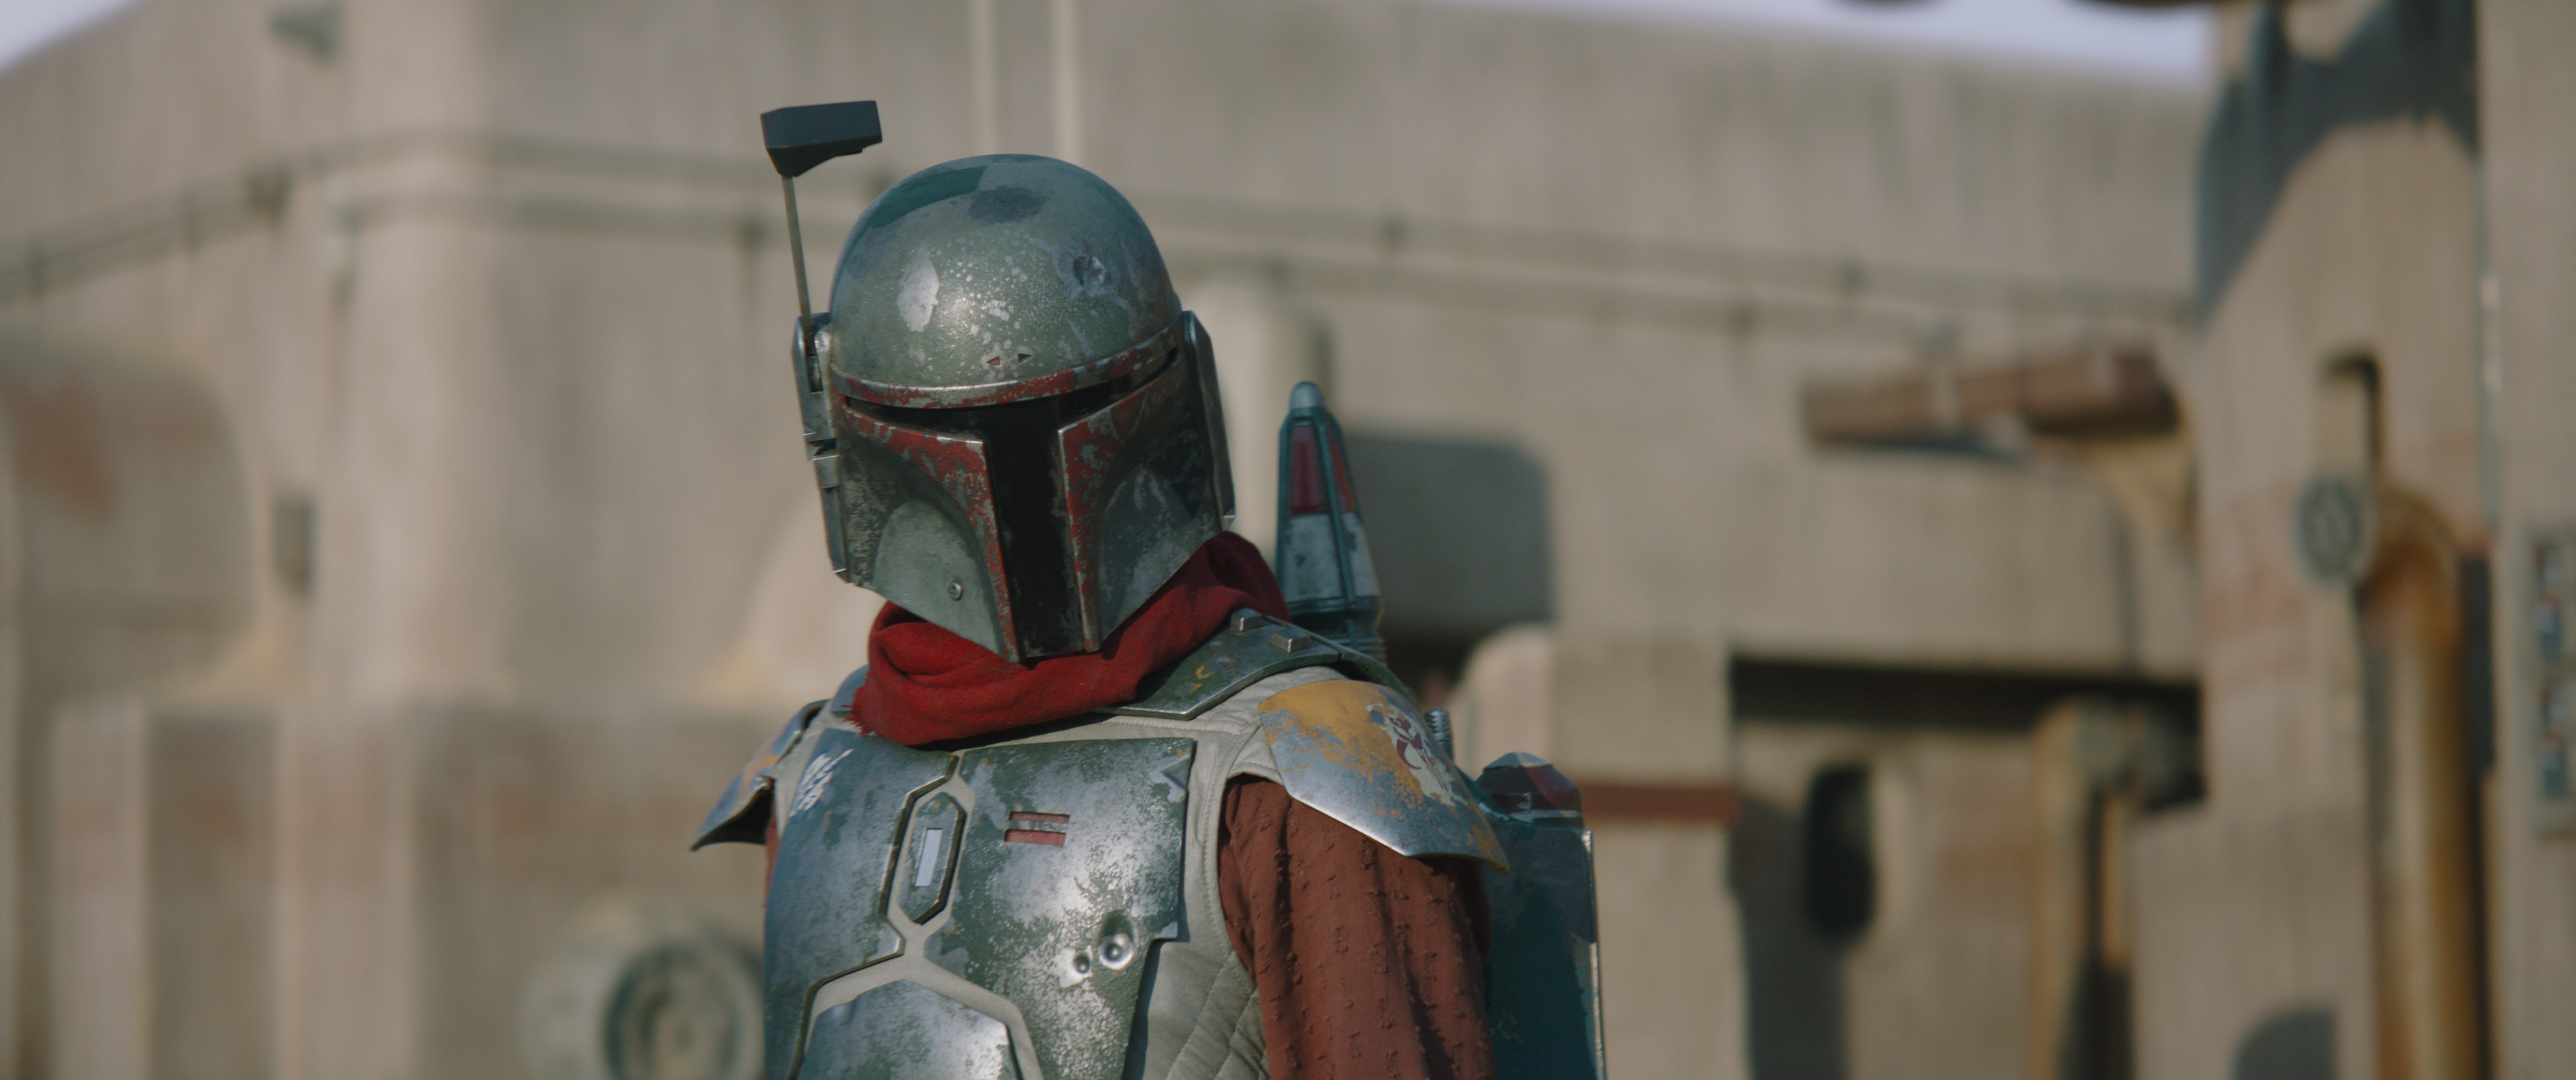 57 Bounty-Worthy Mandalorian Gifts For Star Wars Fans Who Know The Way